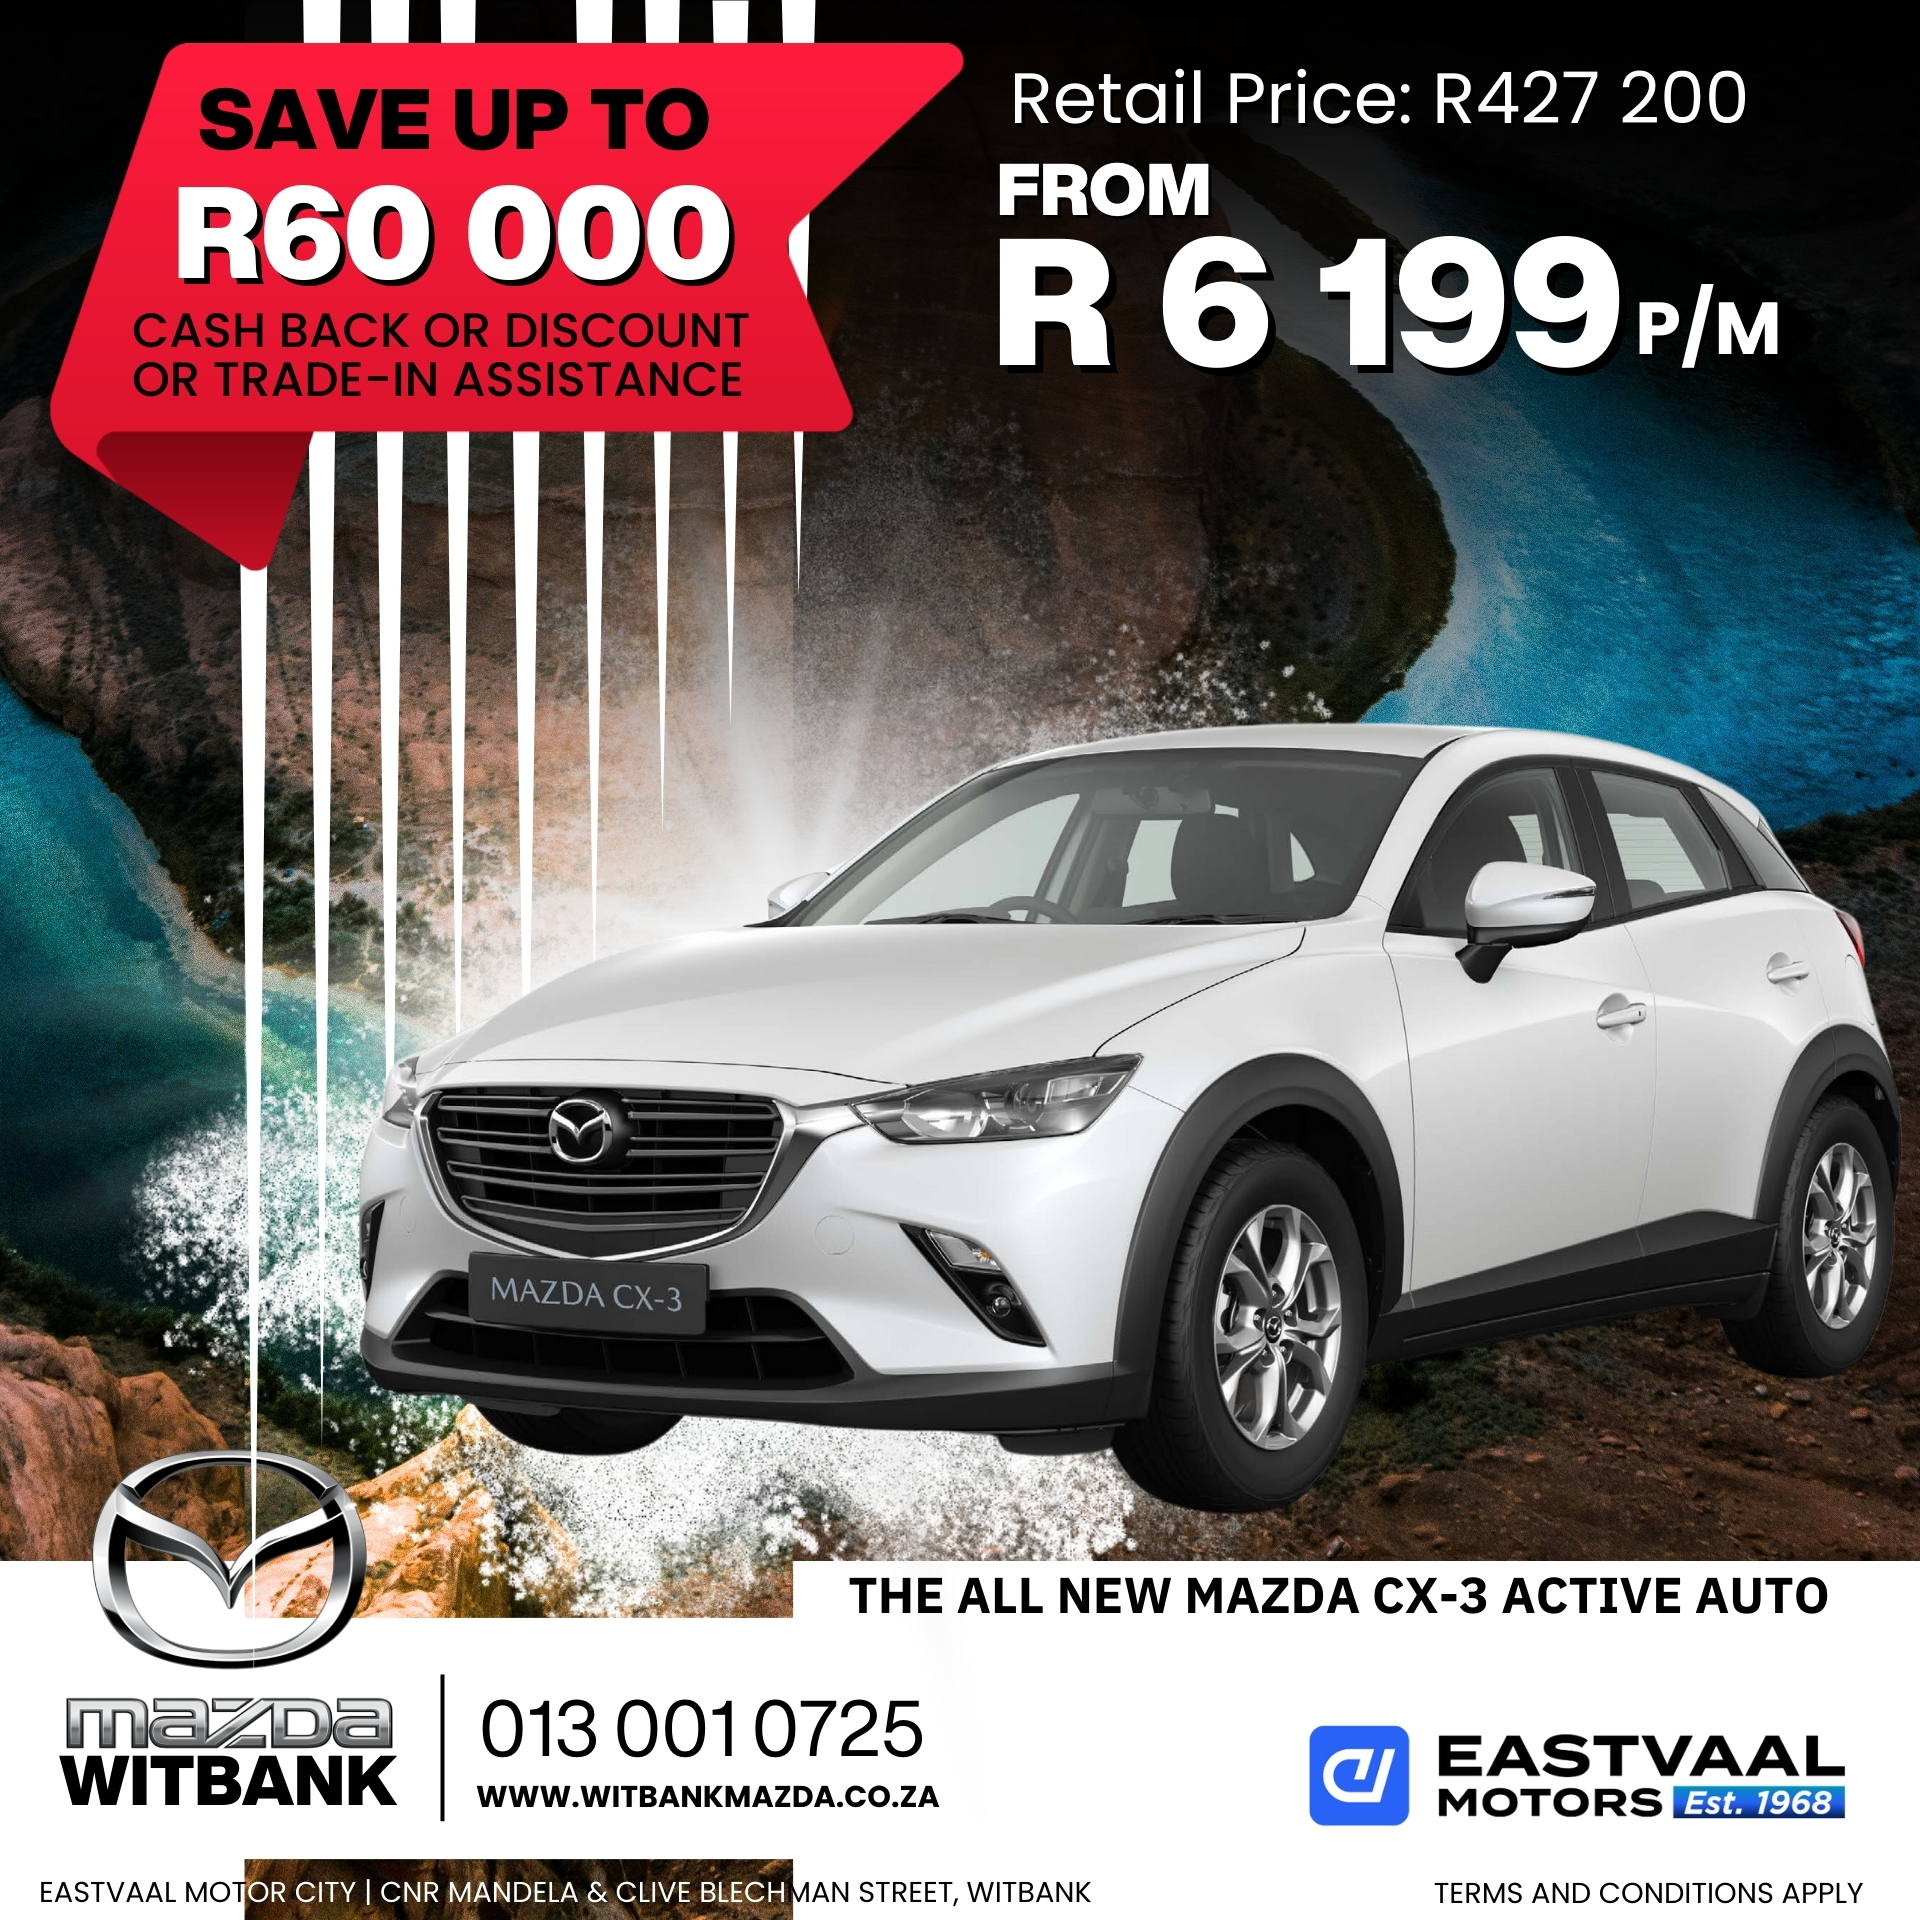 Experience the thrill of the road with Mazda this July. Visit Eastvaal Motor City for amazing deals and test drives! image from 